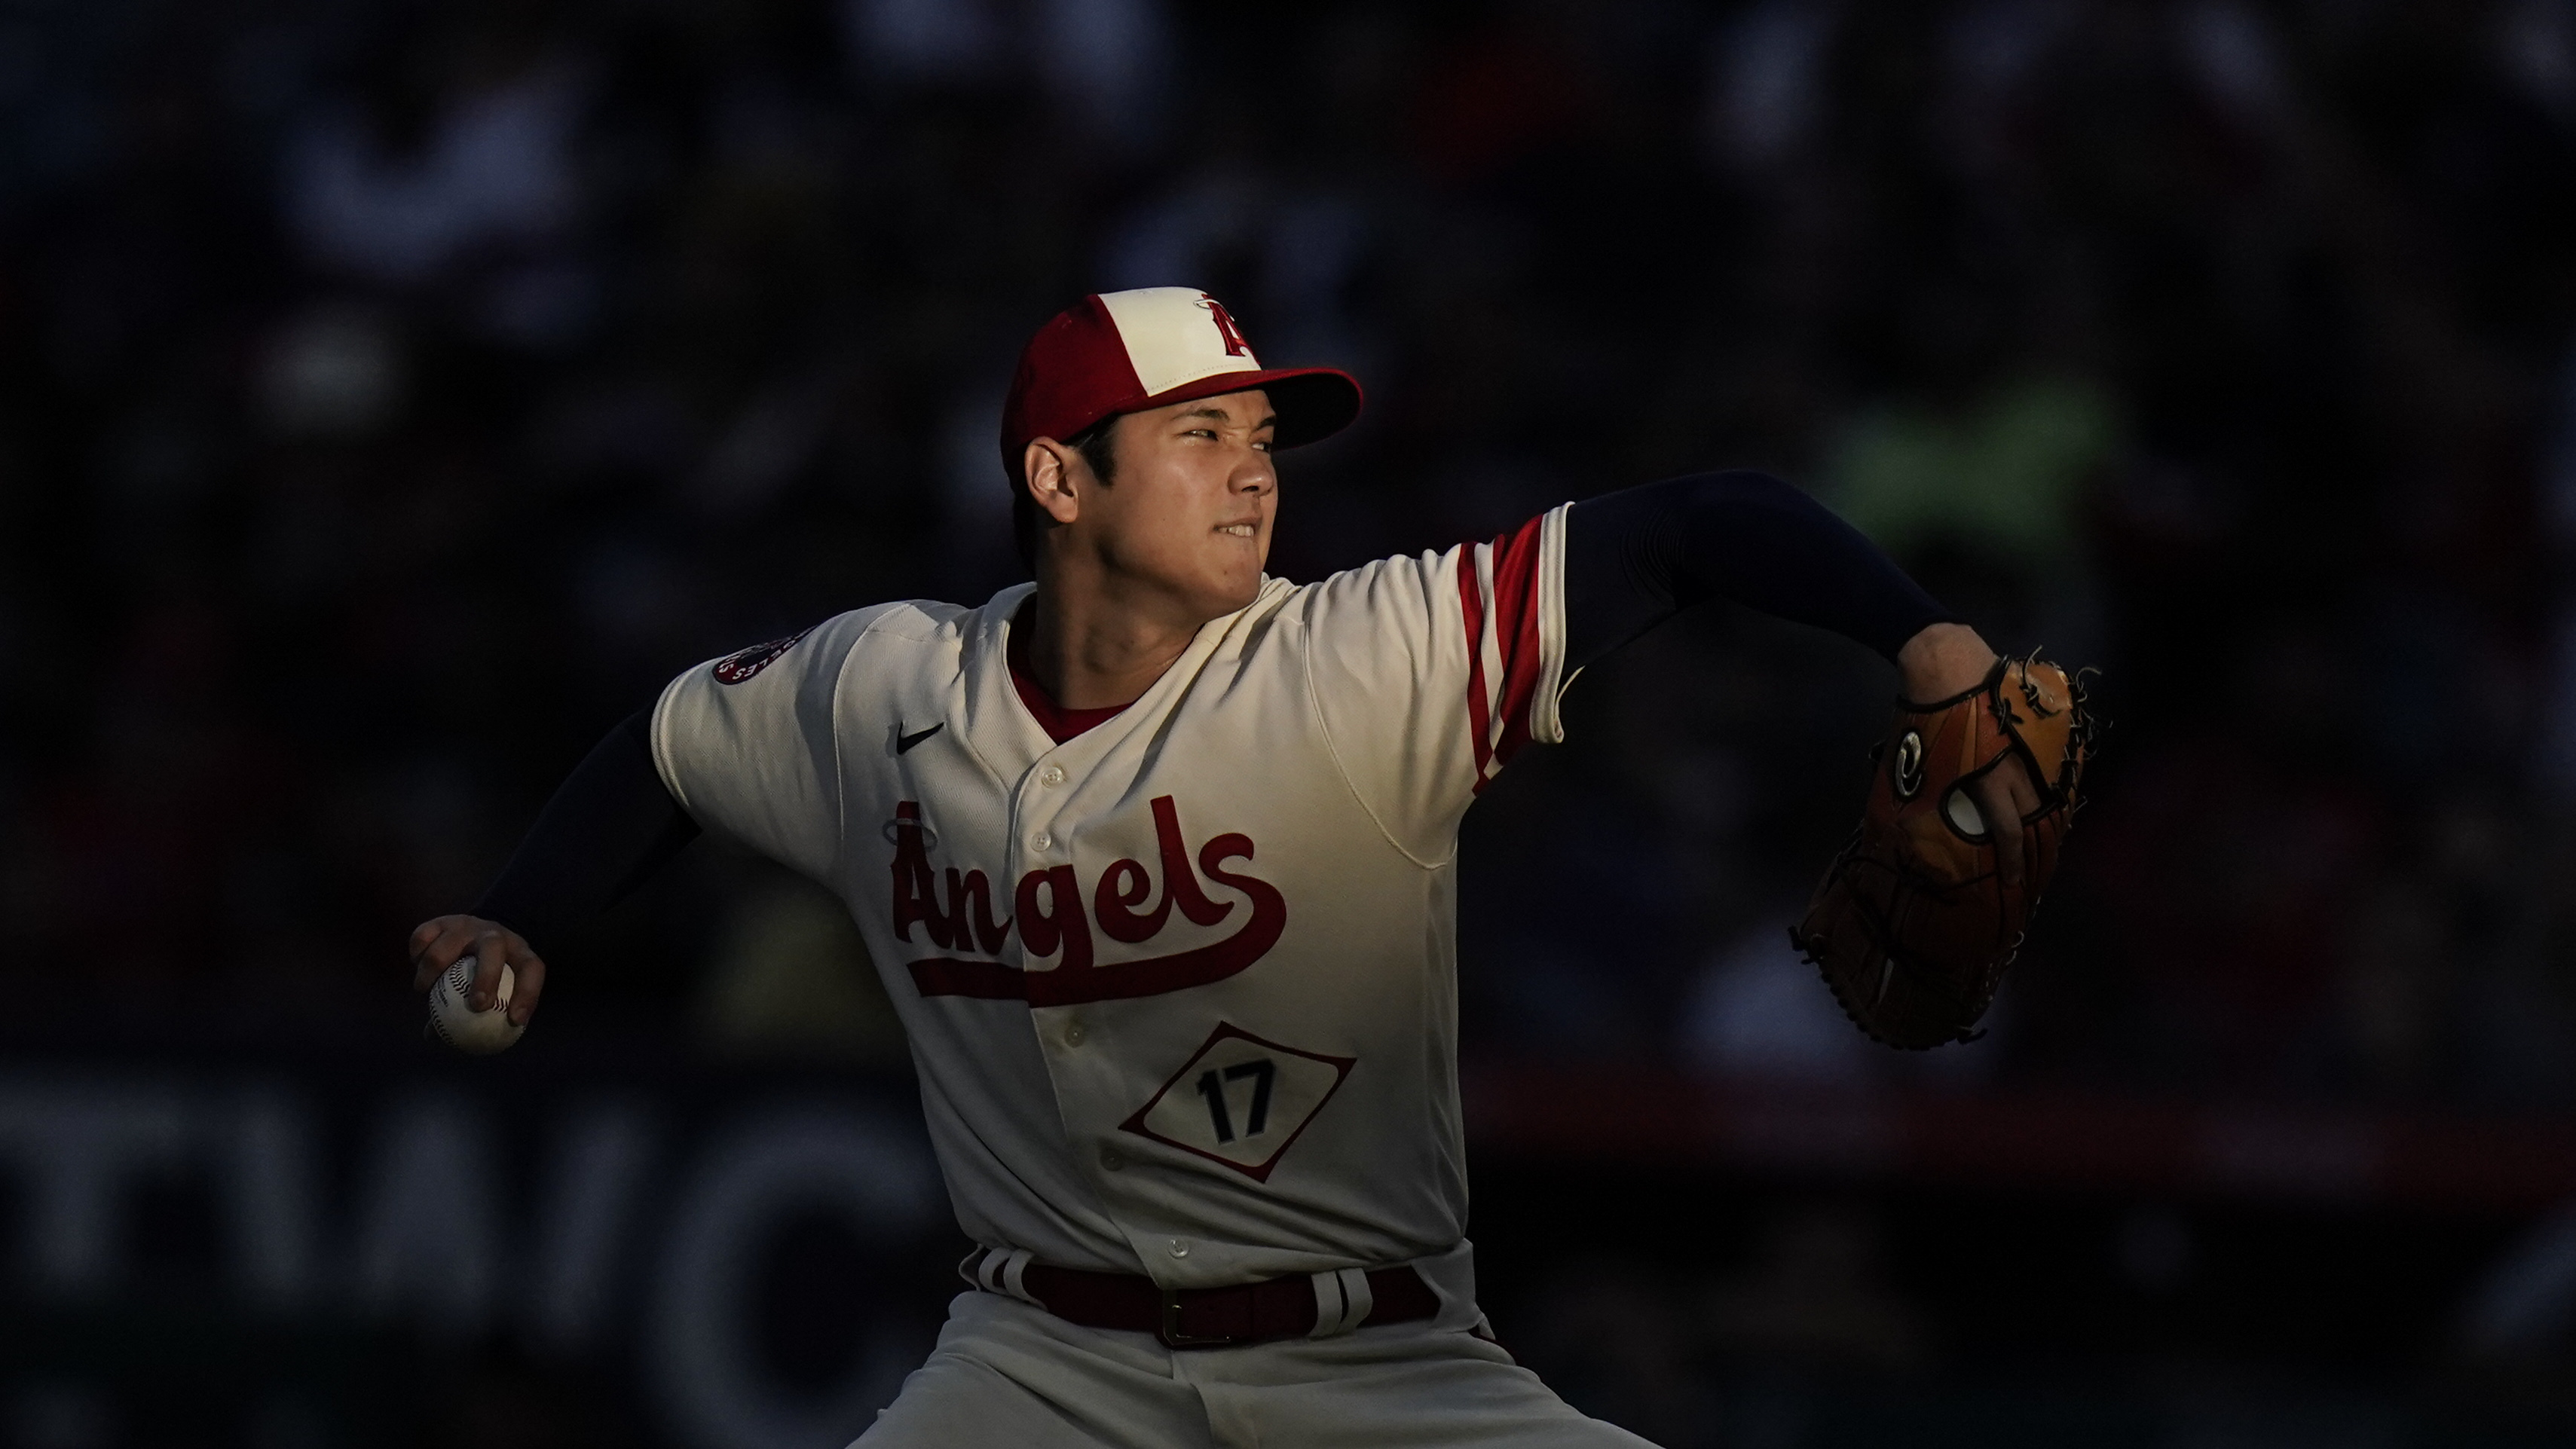 Can the Angels re-sign Shohei Ohtani (大谷翔平), Ohtani's Triple Crown chances  & MORE